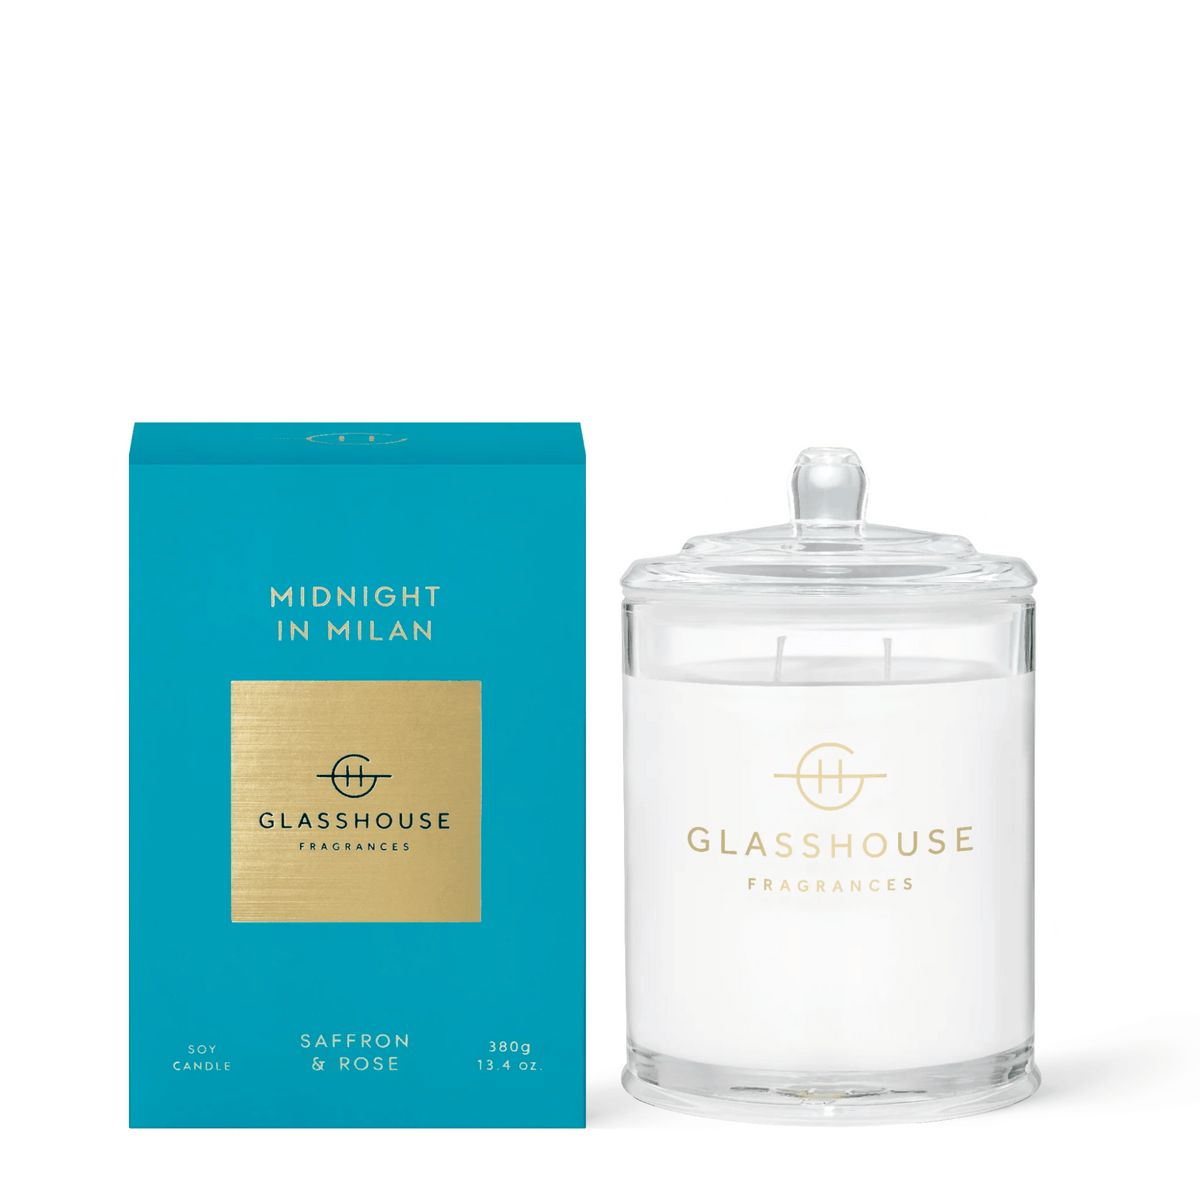 Primary Image of Midnight in Milan Candle